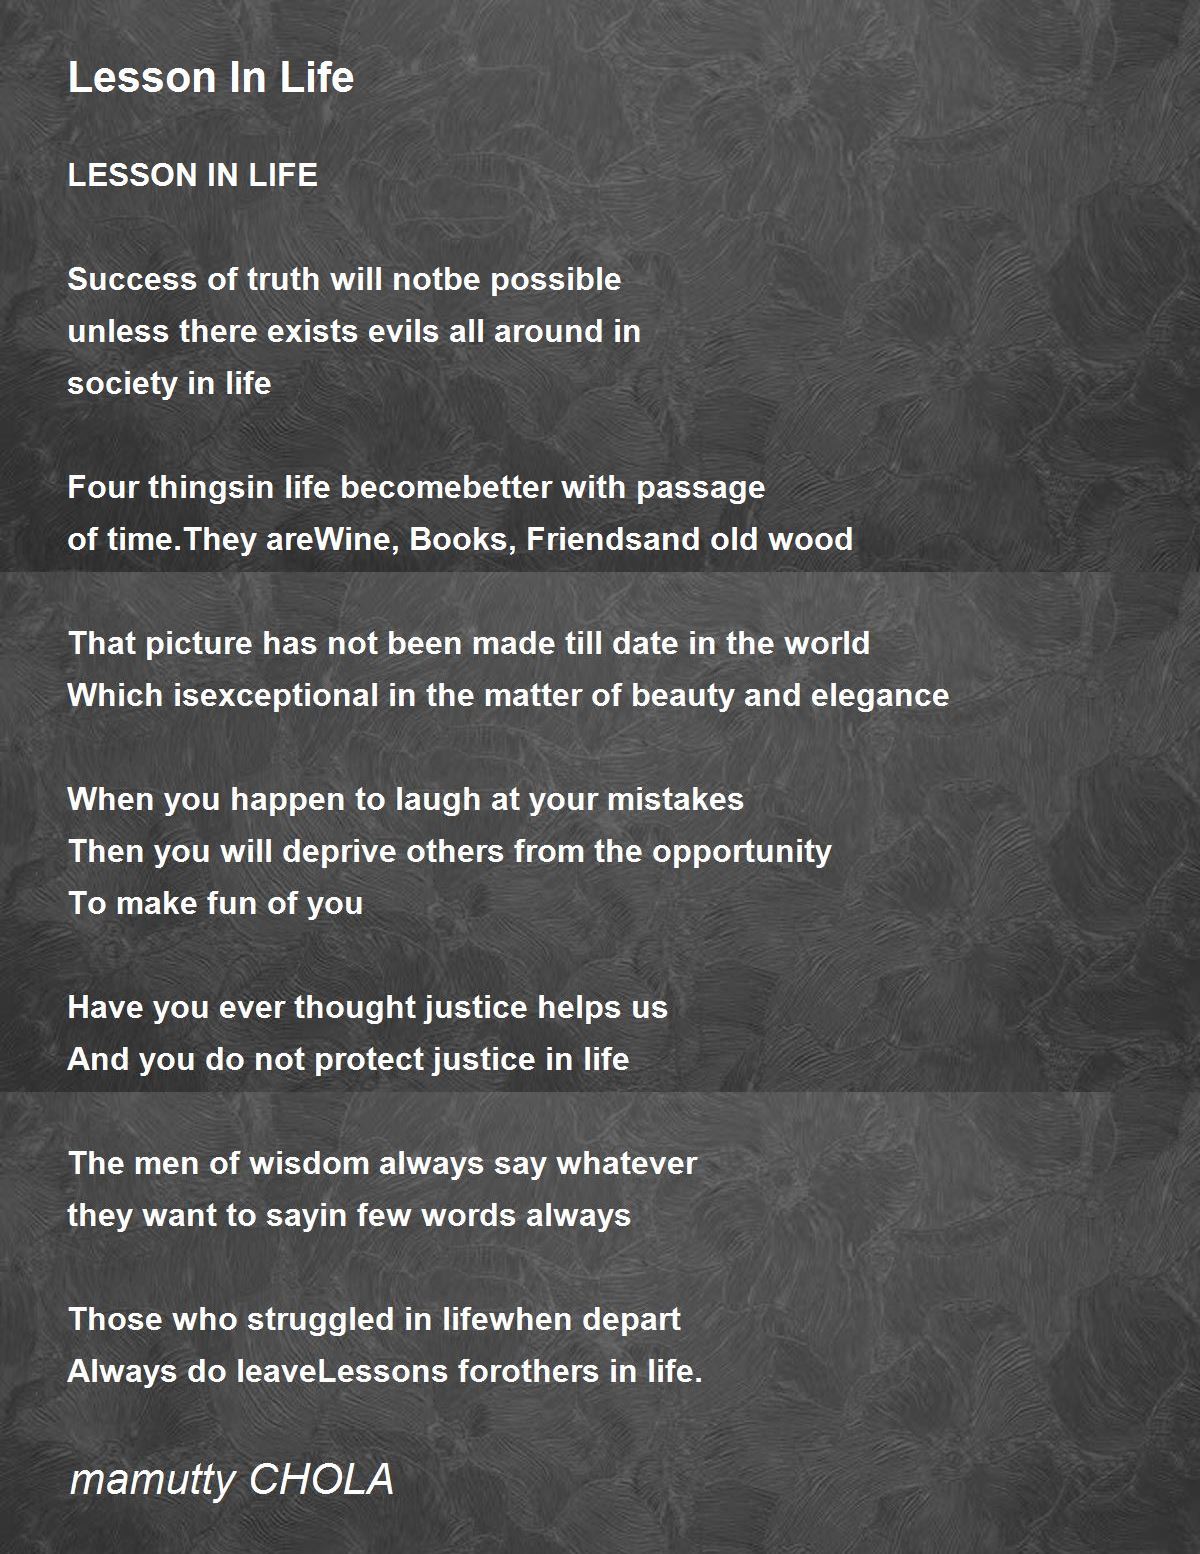 Lesson In Life - Lesson In Life Poem by mamutty CHOLA